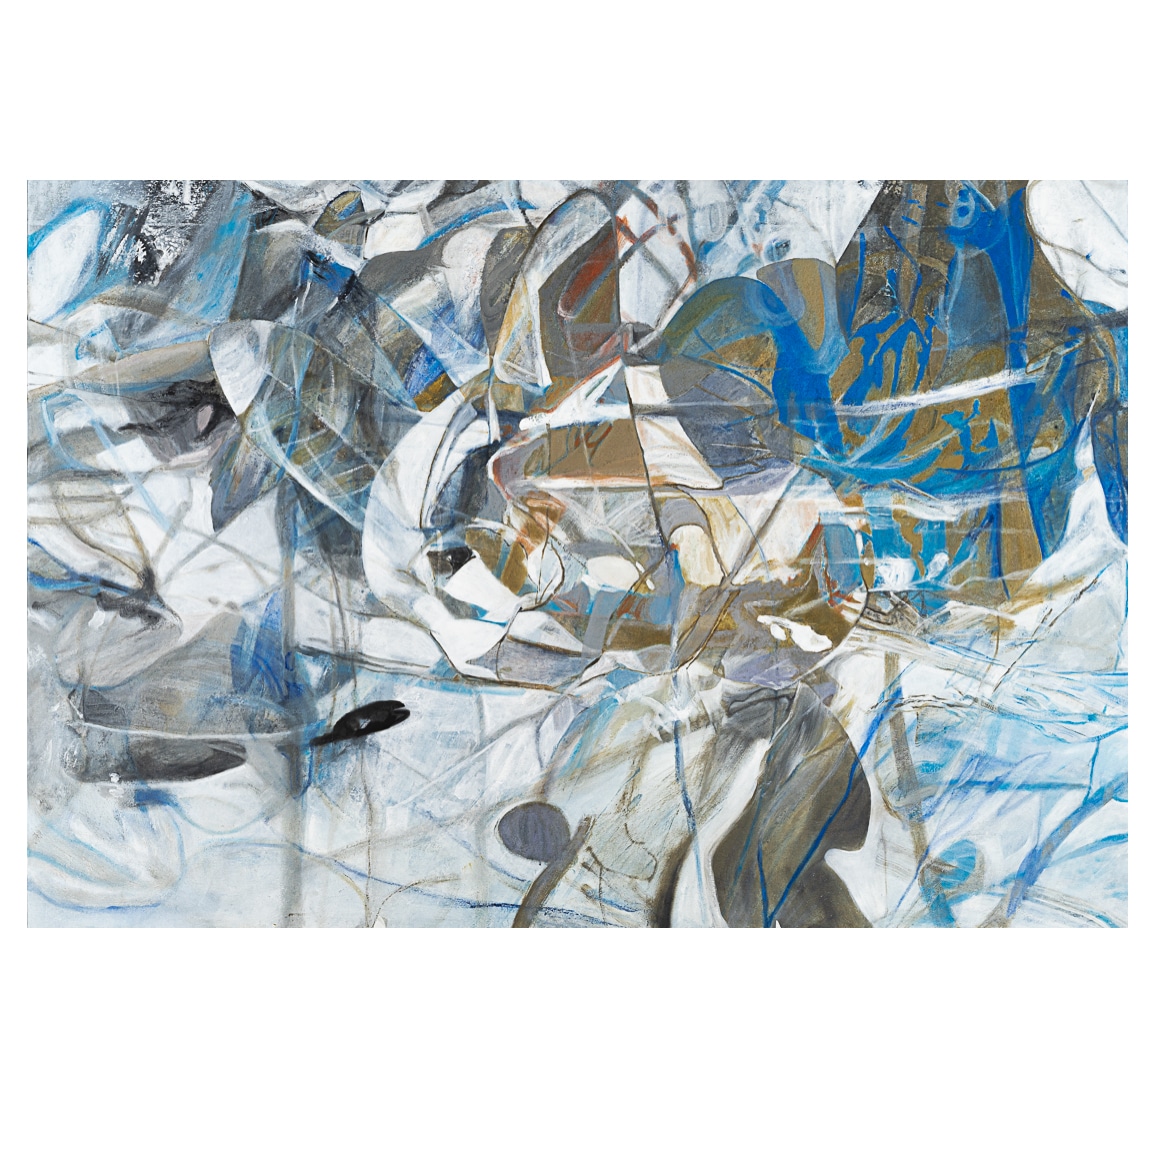 Large blue and white contemporary abstract painting by Laura Letchinger Los Angeles based artist